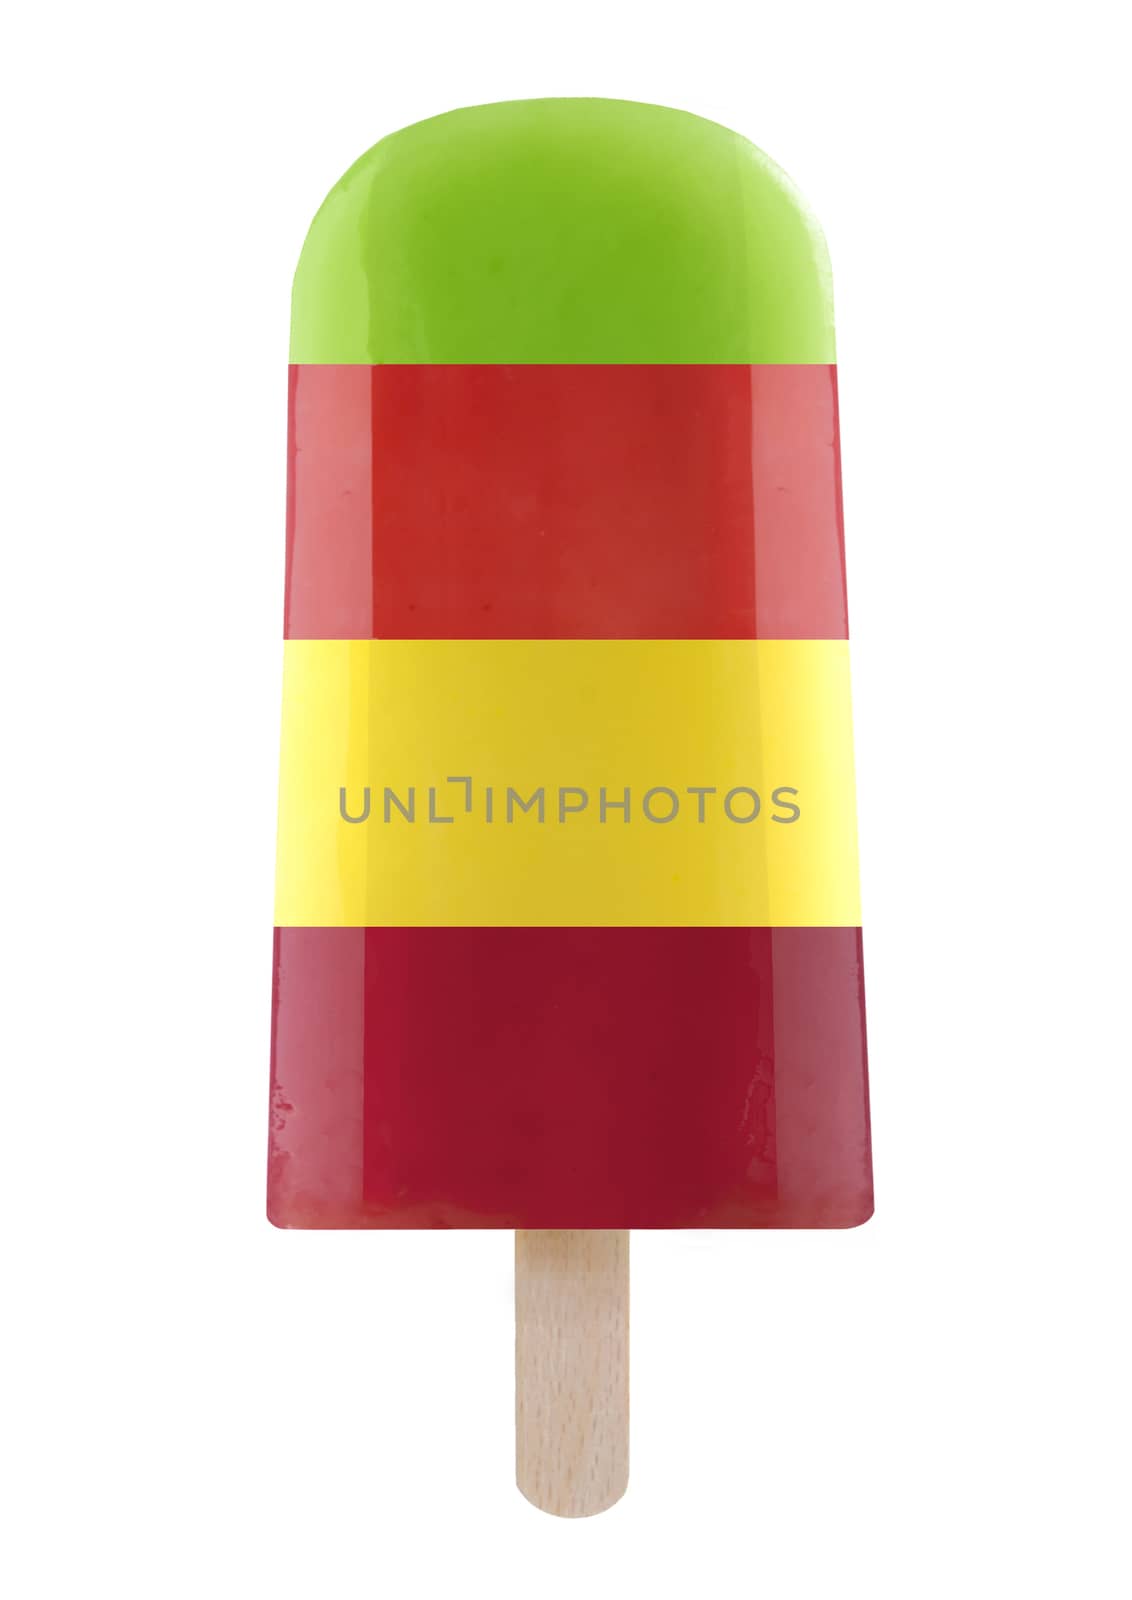 Multi flavored ice lolly over a whtie background